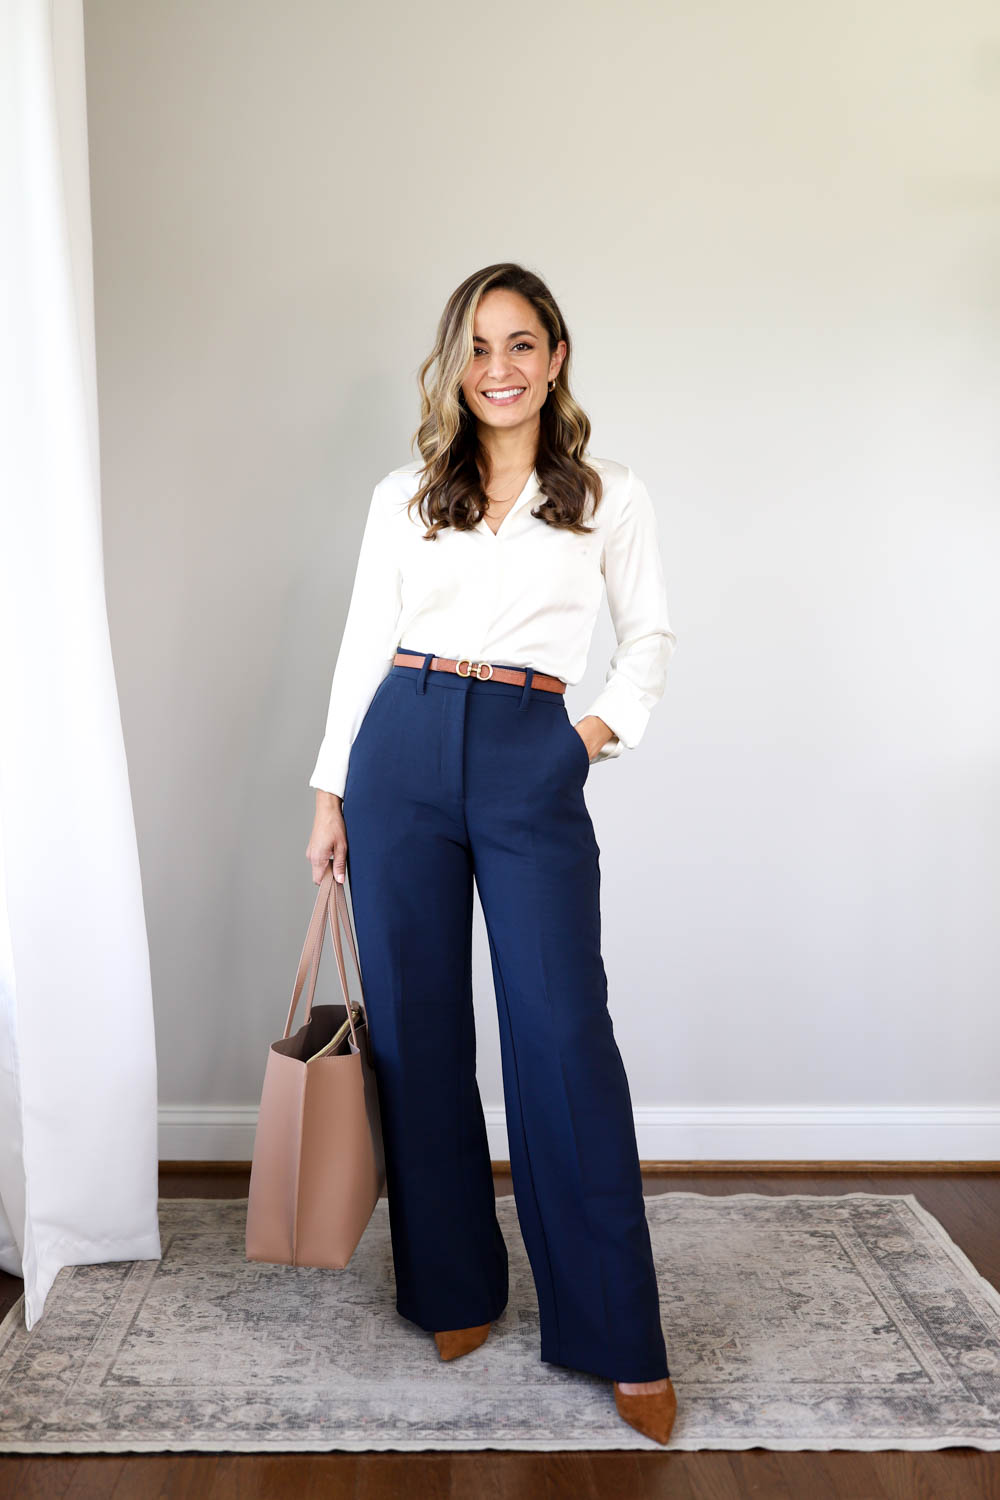 One week of outfits for work via pumps and push-ups blog | petite style blog | petite fashion | petite blogger | wide leg trousers outfits 